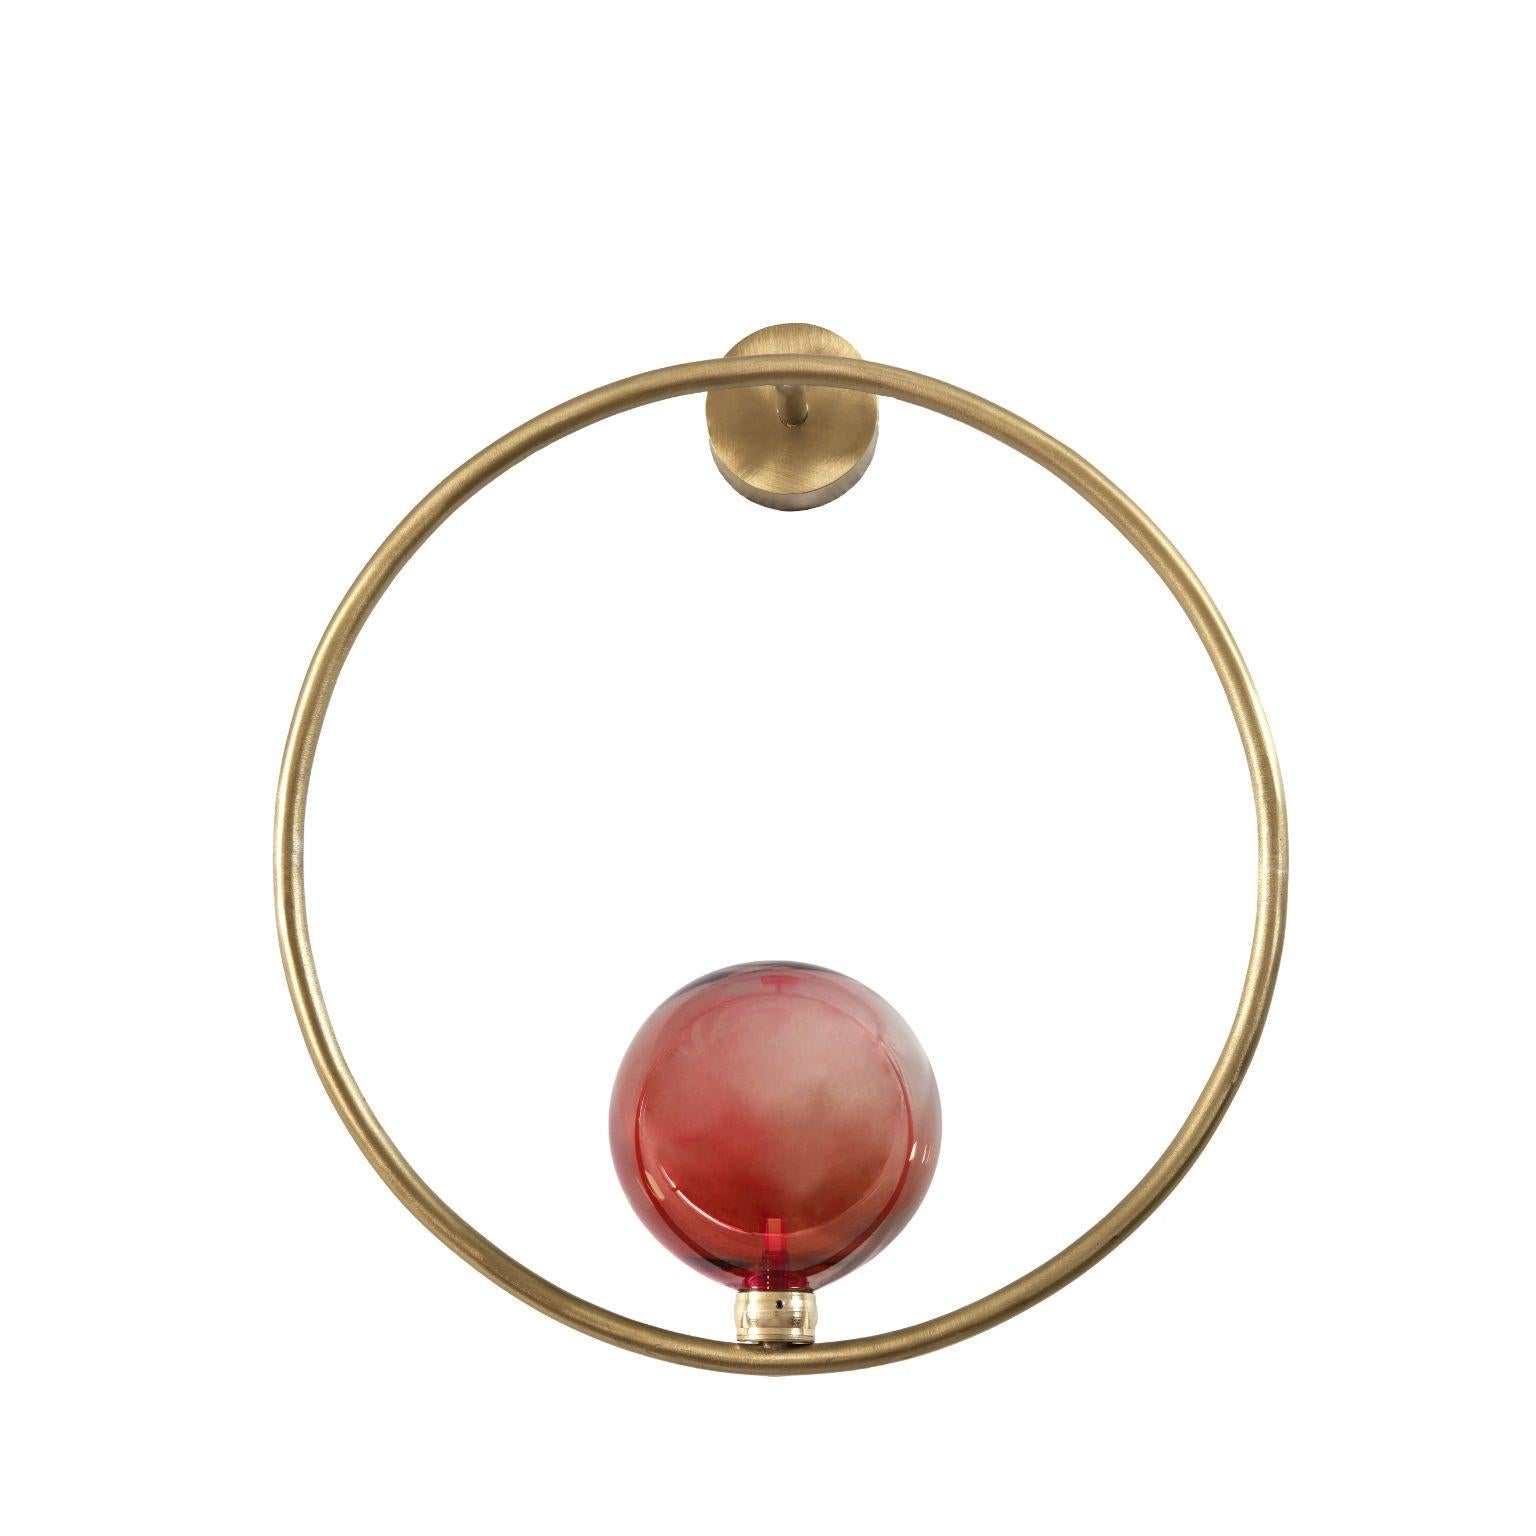 Gaia red sconce by Emilie Lemardeley
Dimensions: D38x H19 cm
Materials: brass and hand blown glass, Led 12v / 5W
Weight: 2 kg
Available in different glass colors and finishes.

Gaia is the personification of the Earth and the ancestral mother